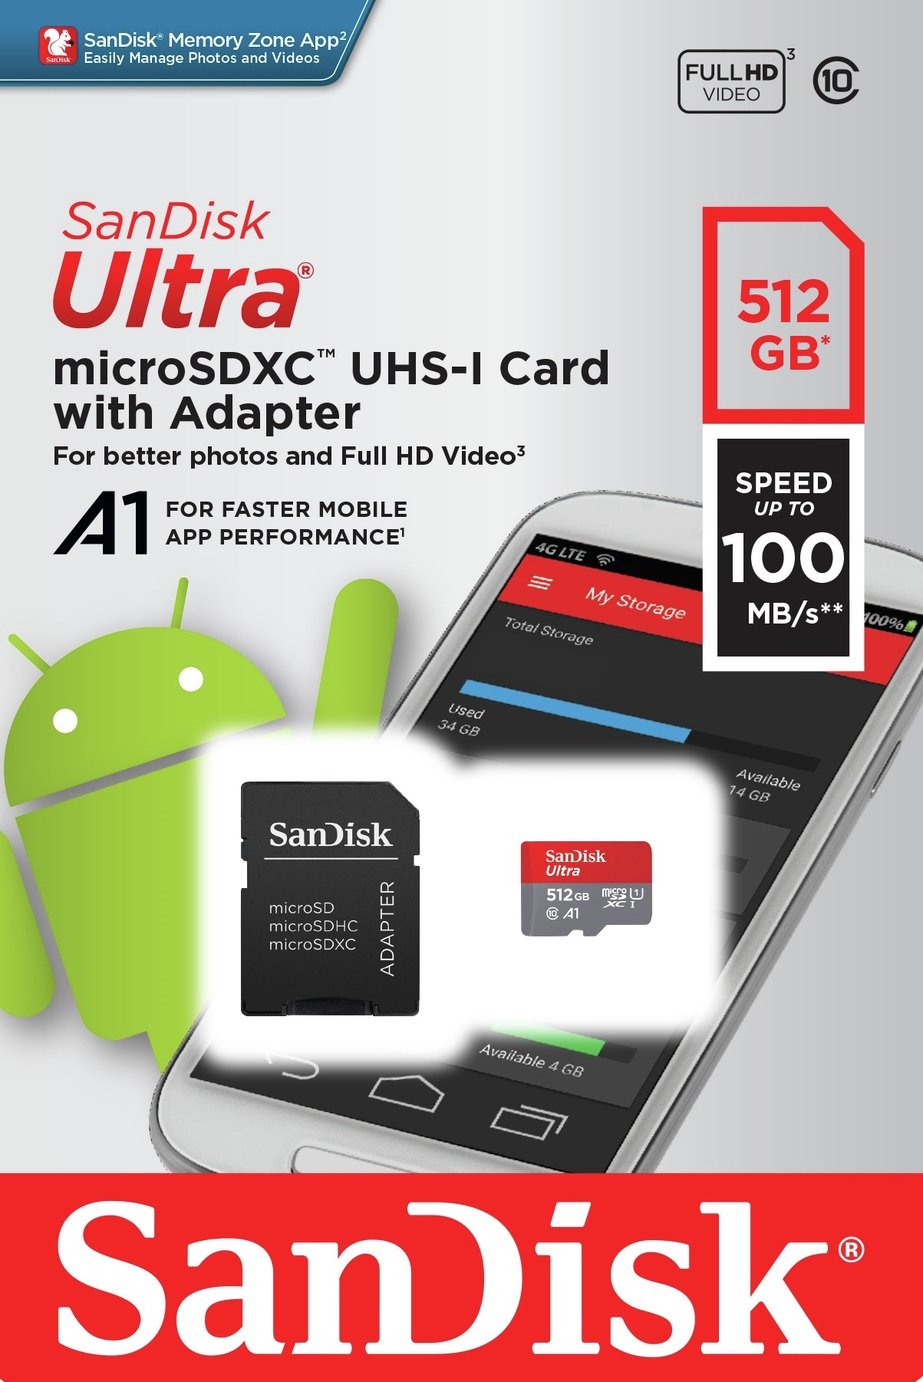 SanDisk Ultra Micro SDXC Memory Card Review